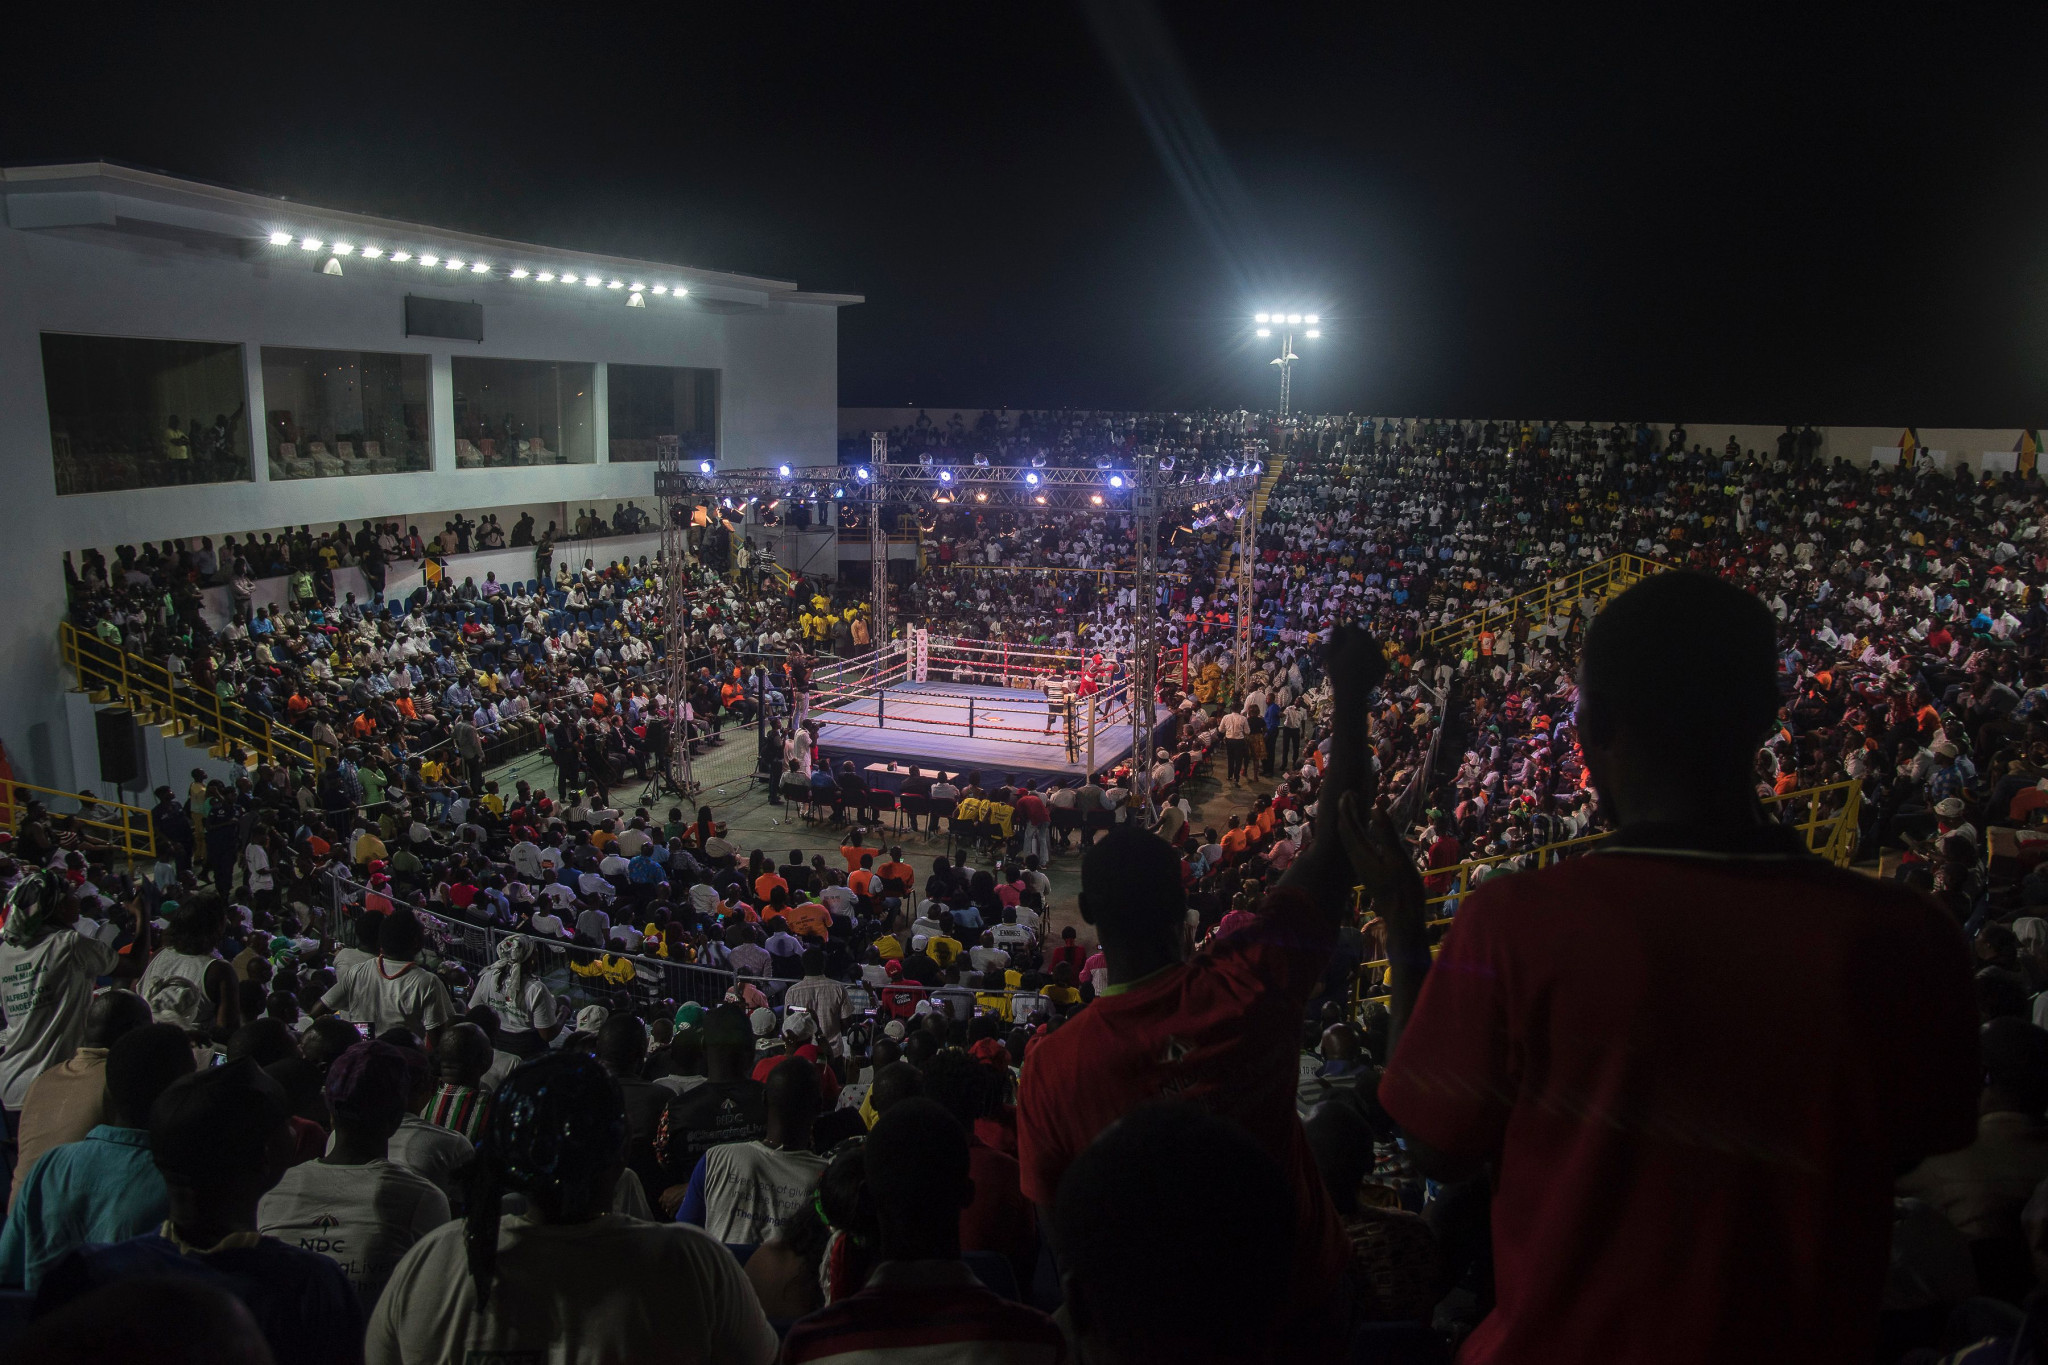  Theophilus Allotey has been left out of Ghana's Birmingham 2022 squad despite winning gold at the selection event held at Bukom Boxing Arena, pictured, and Accra Sports Stadium ©Getty Images